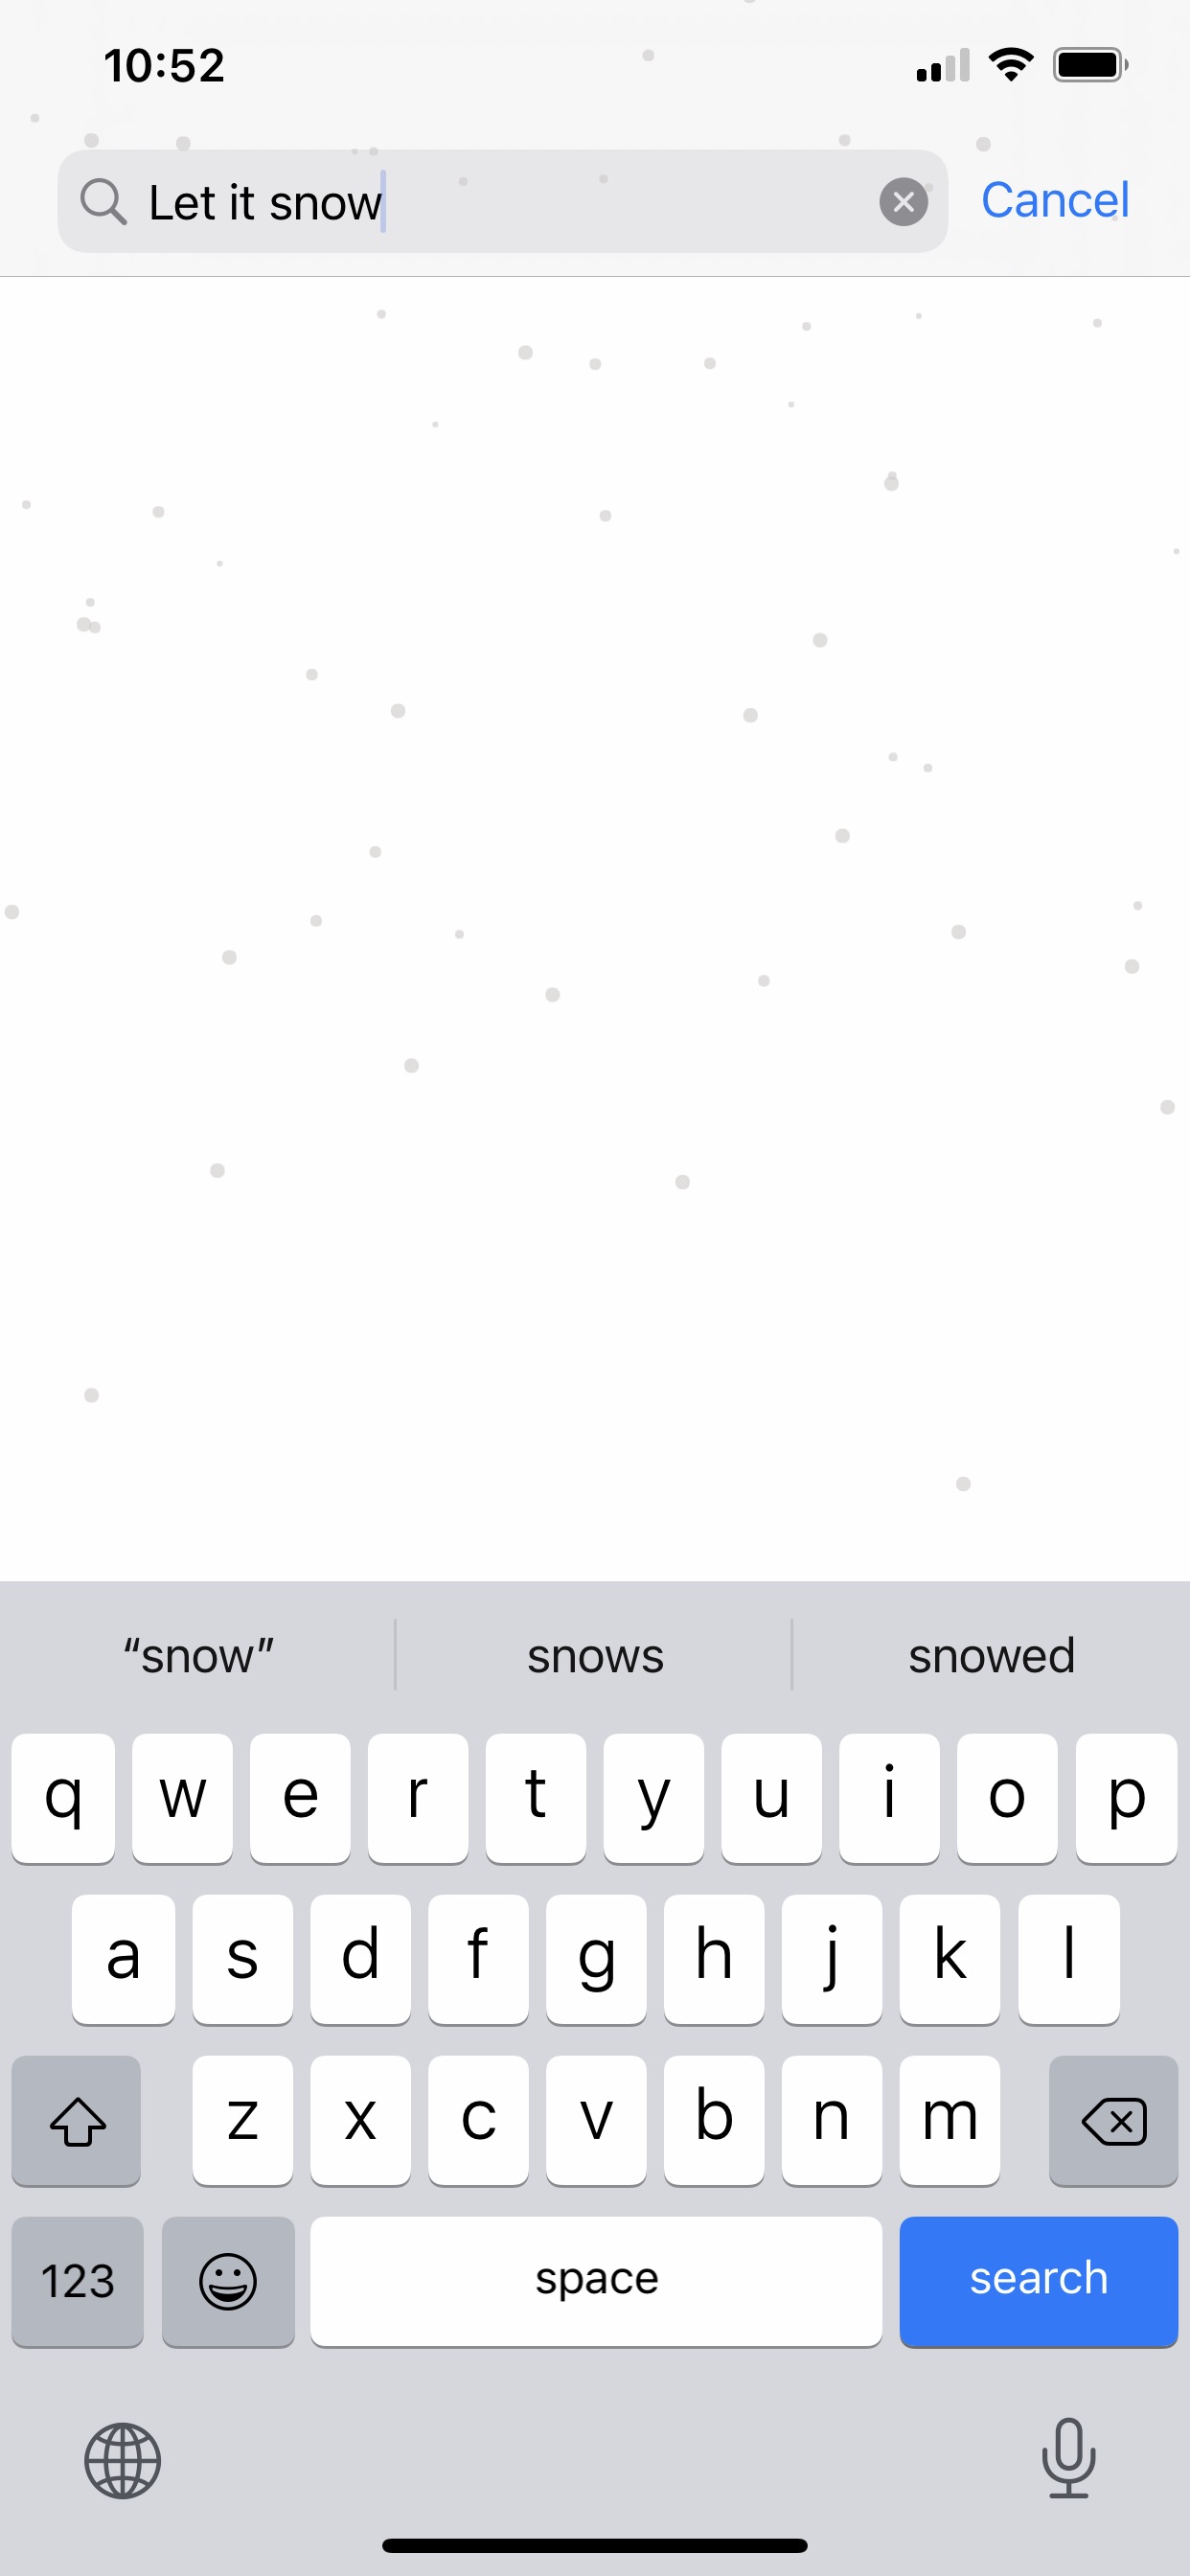 Apple Adds 'Let It Snow' Easter Egg to Apple Store App